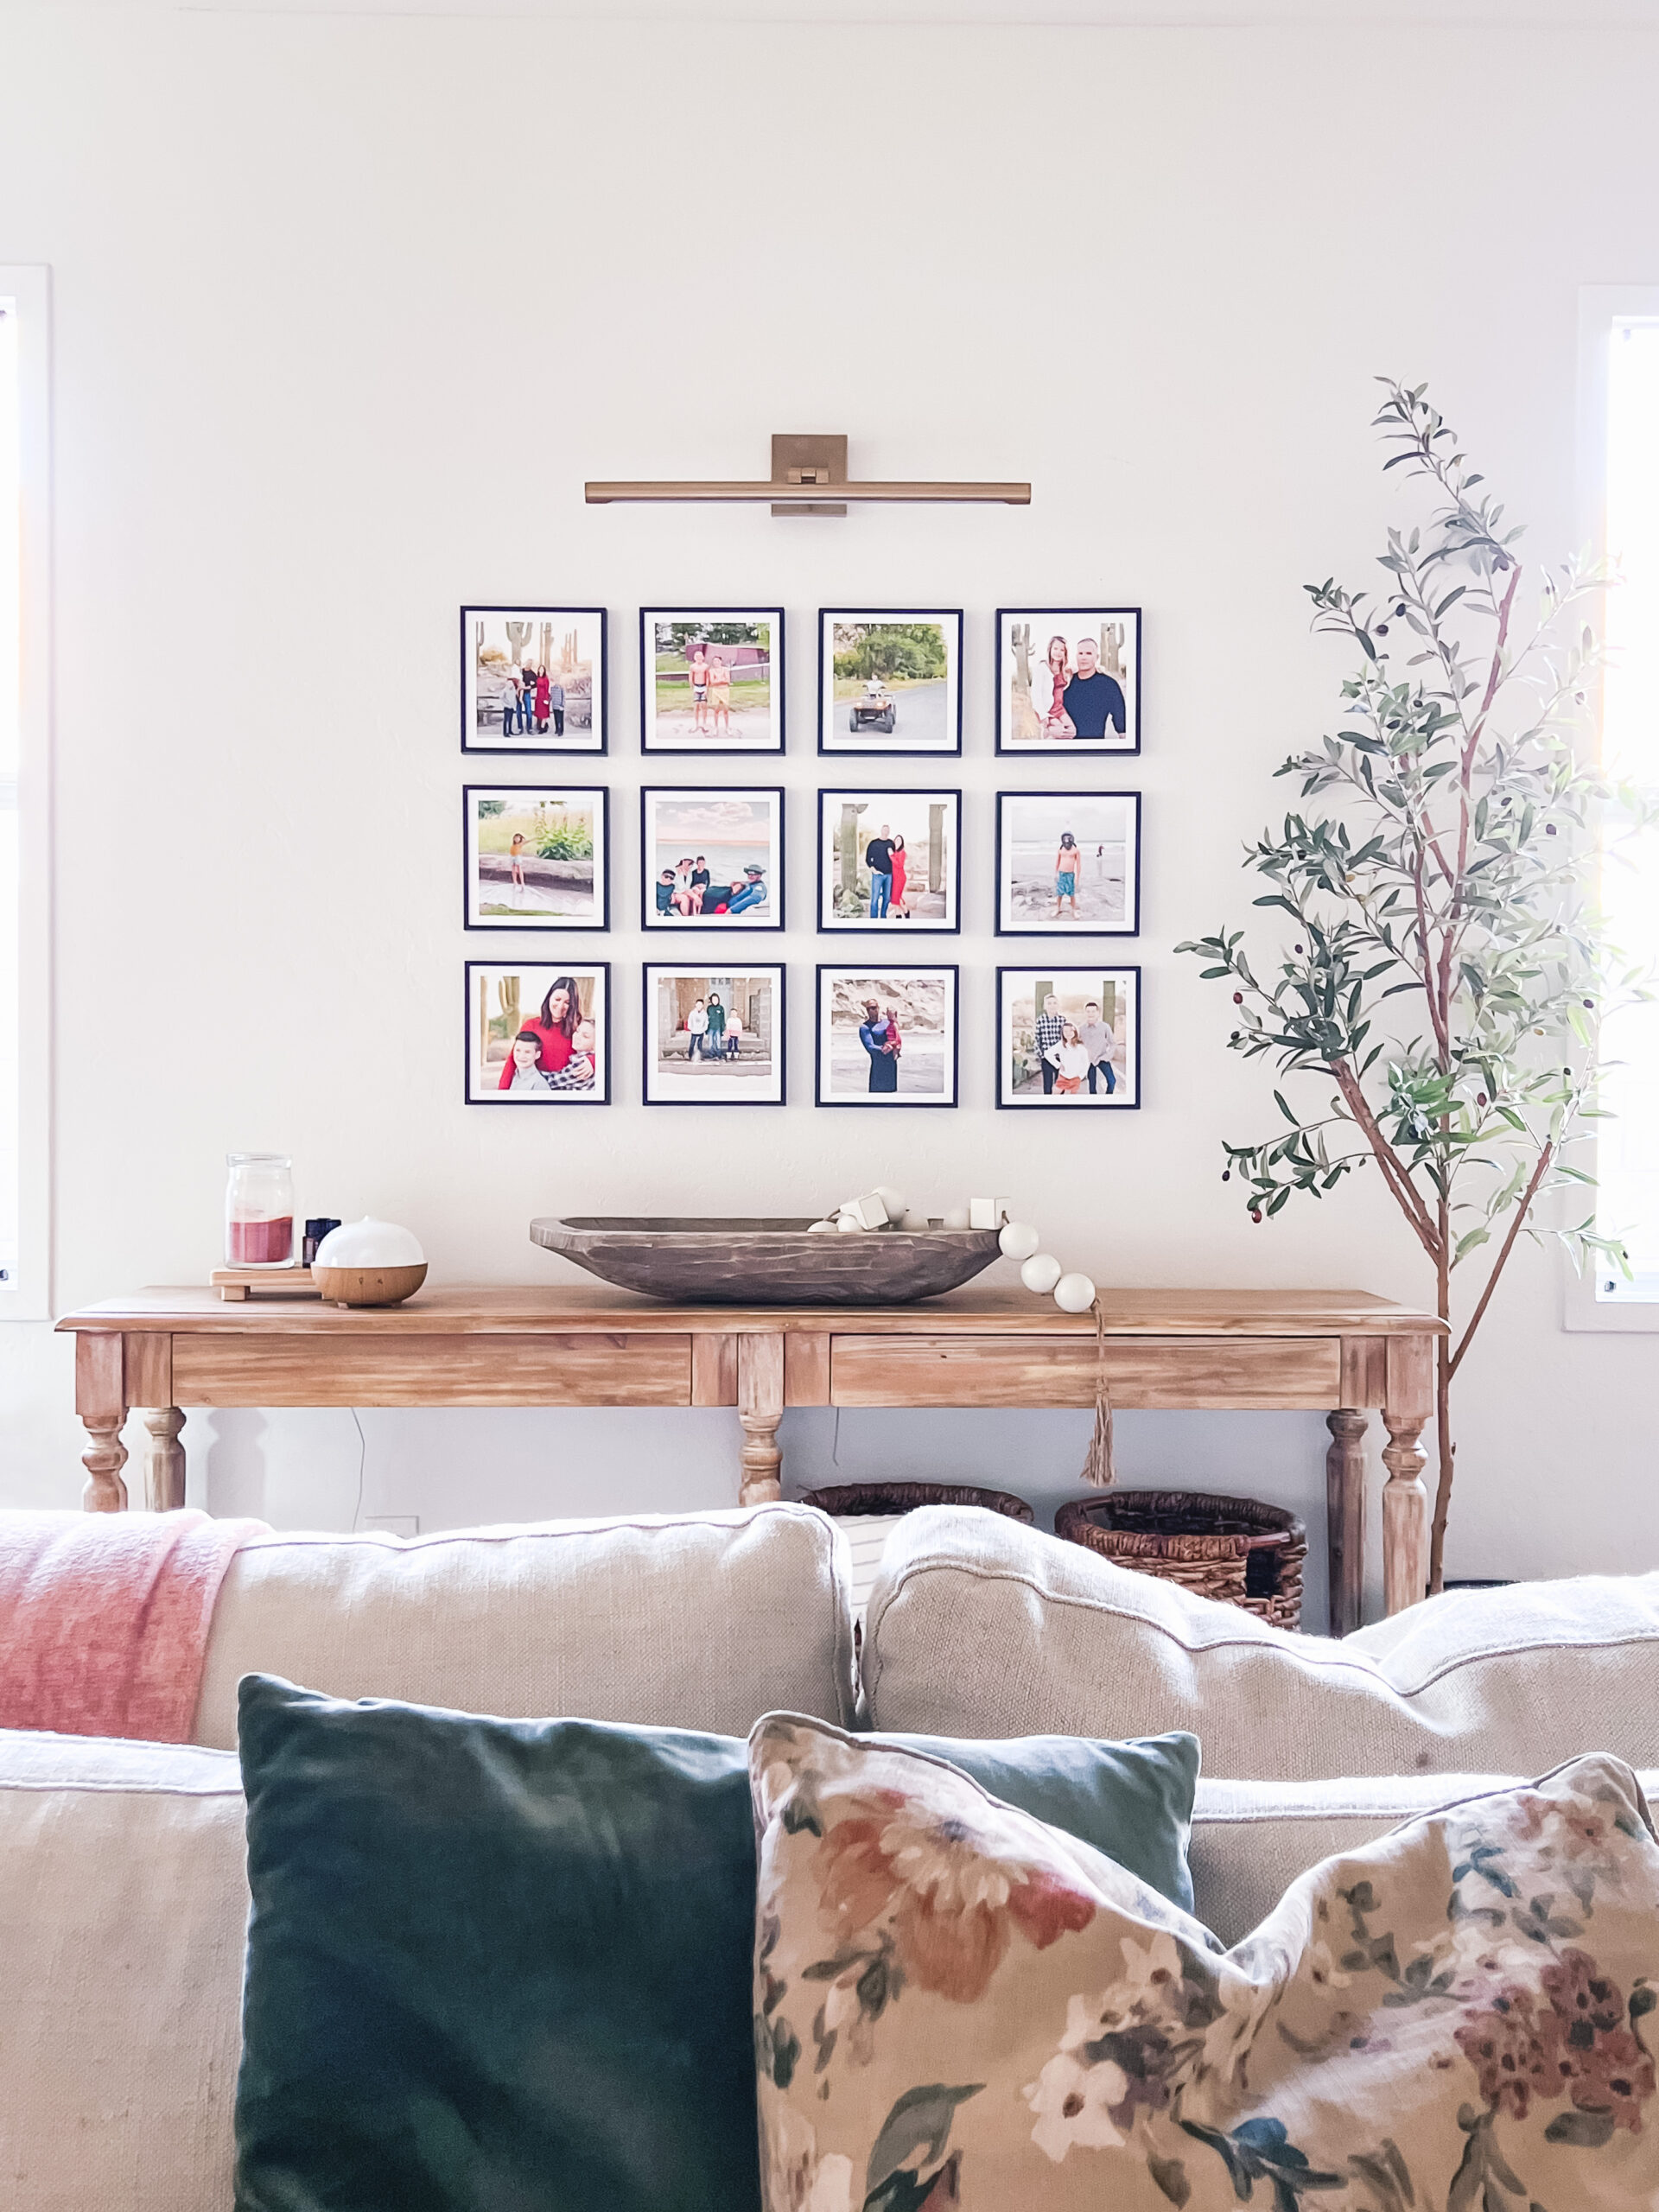 Get your favorite family photos off your phone and onto your wall with these foolproof Mixtiles frames. Best part?--they're reusable so adjust as many times as you need for an easy entryway gallery wall. BONUS: use code LOLLY10 for buy 10, get 10 free! | Mixtiles discount code